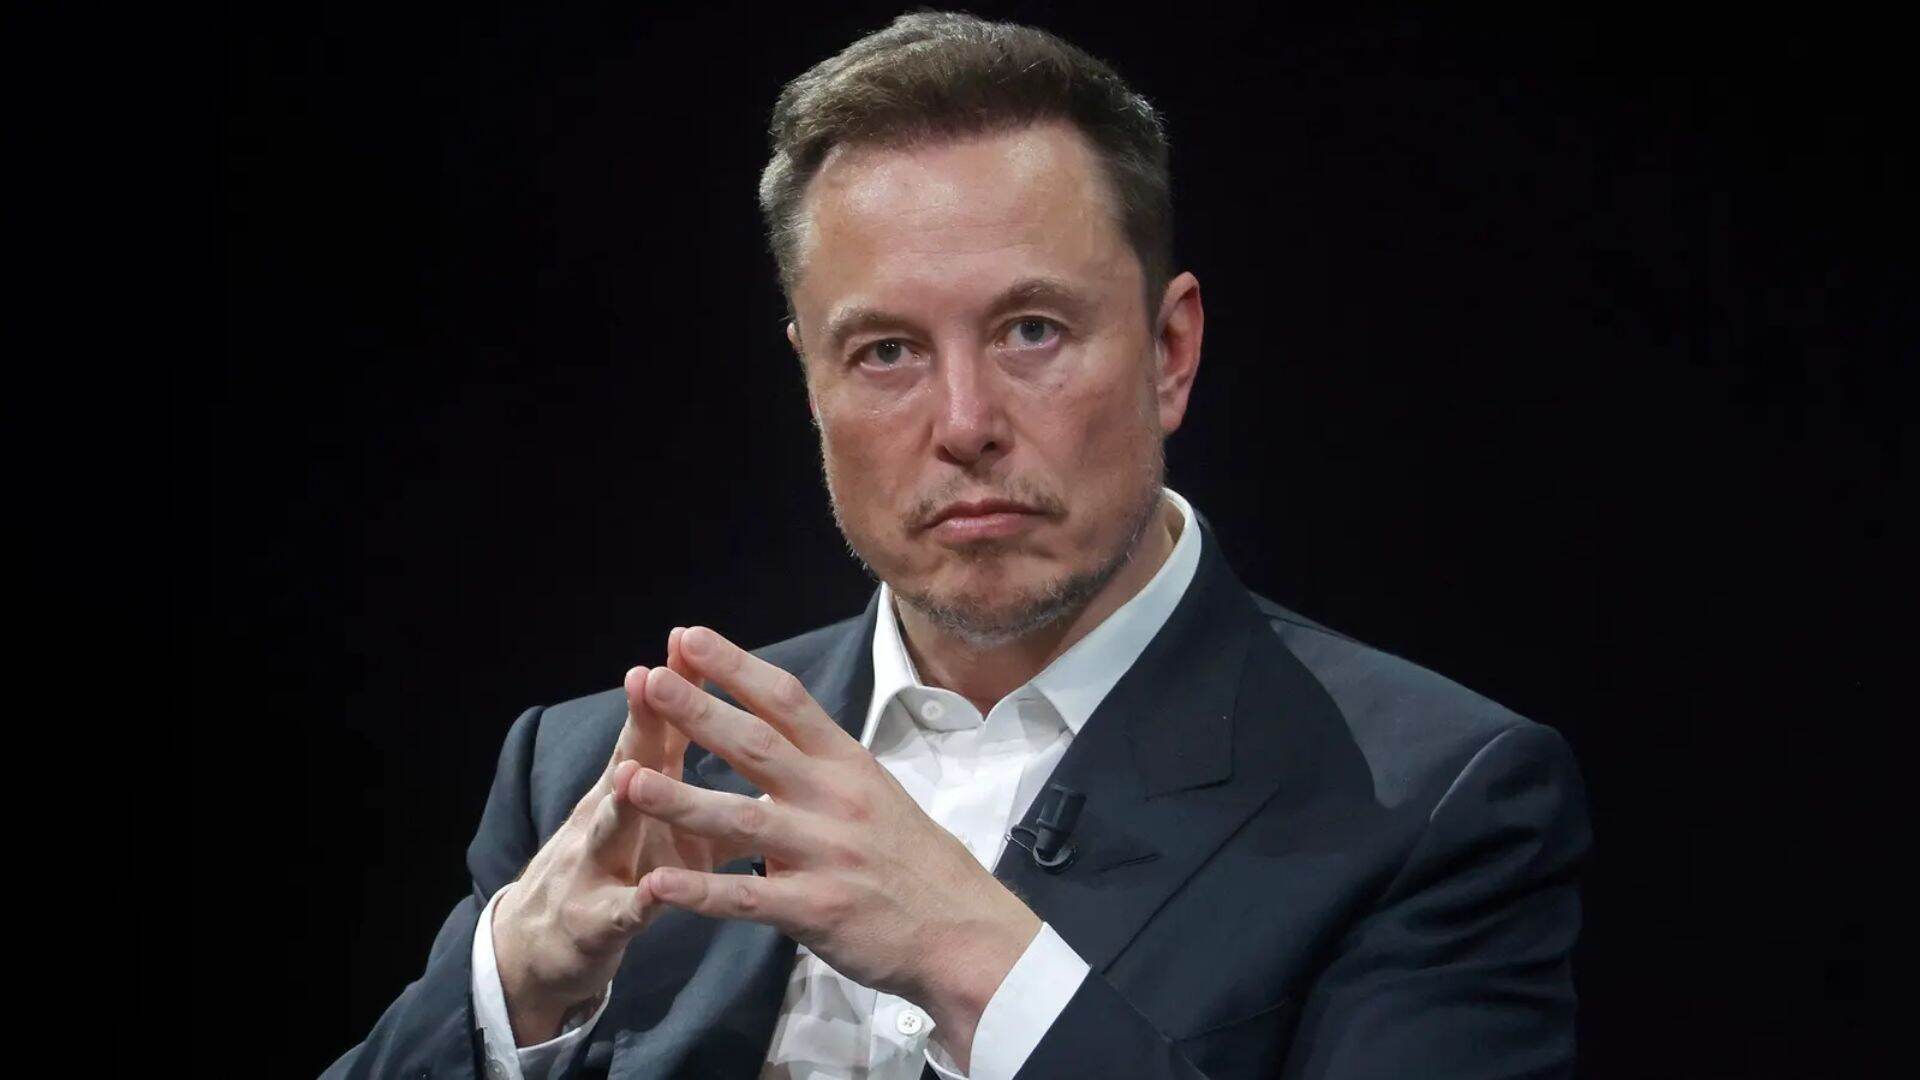 Elon Musk's Alleged Behavior Raises Concerns: A Look Into Workplace Culture At SpaceX And Tesla